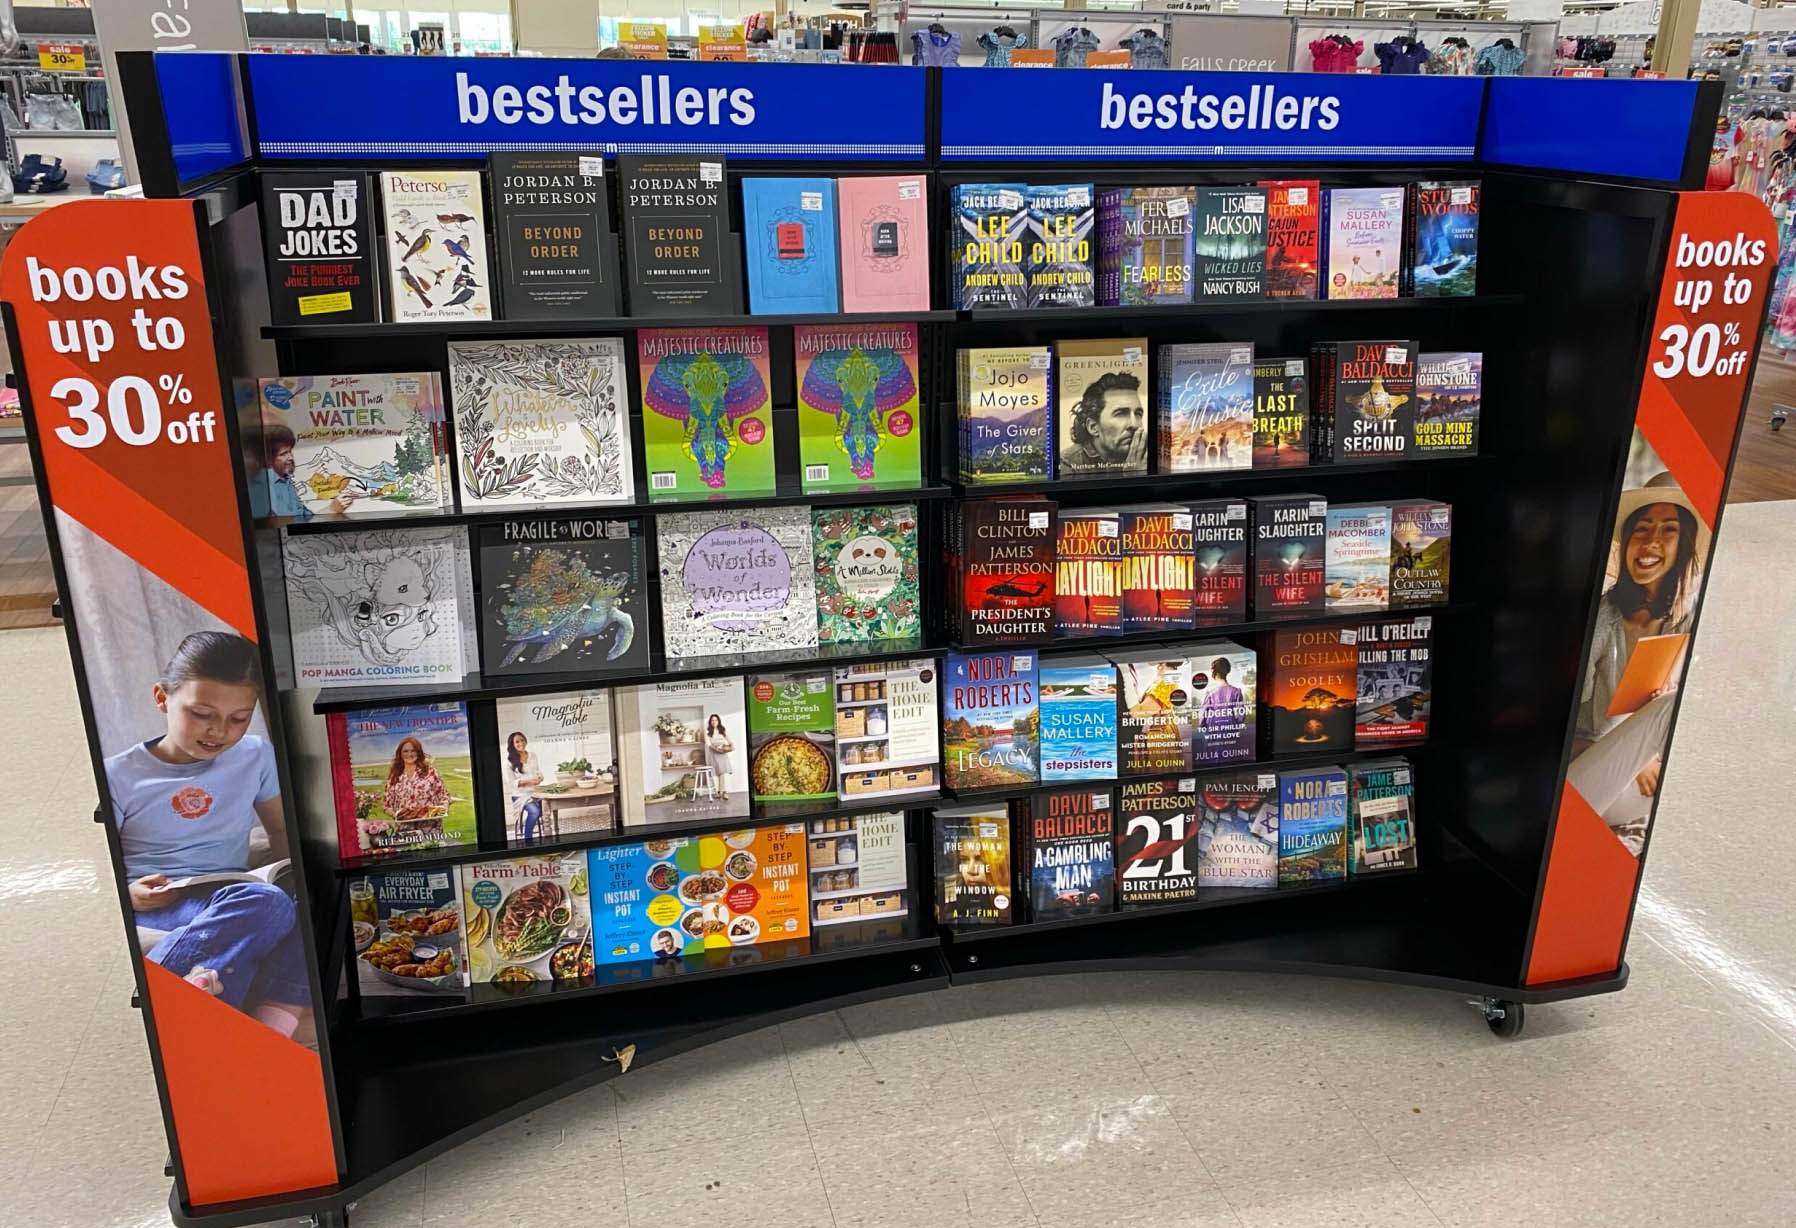 Endcap with bestselling books